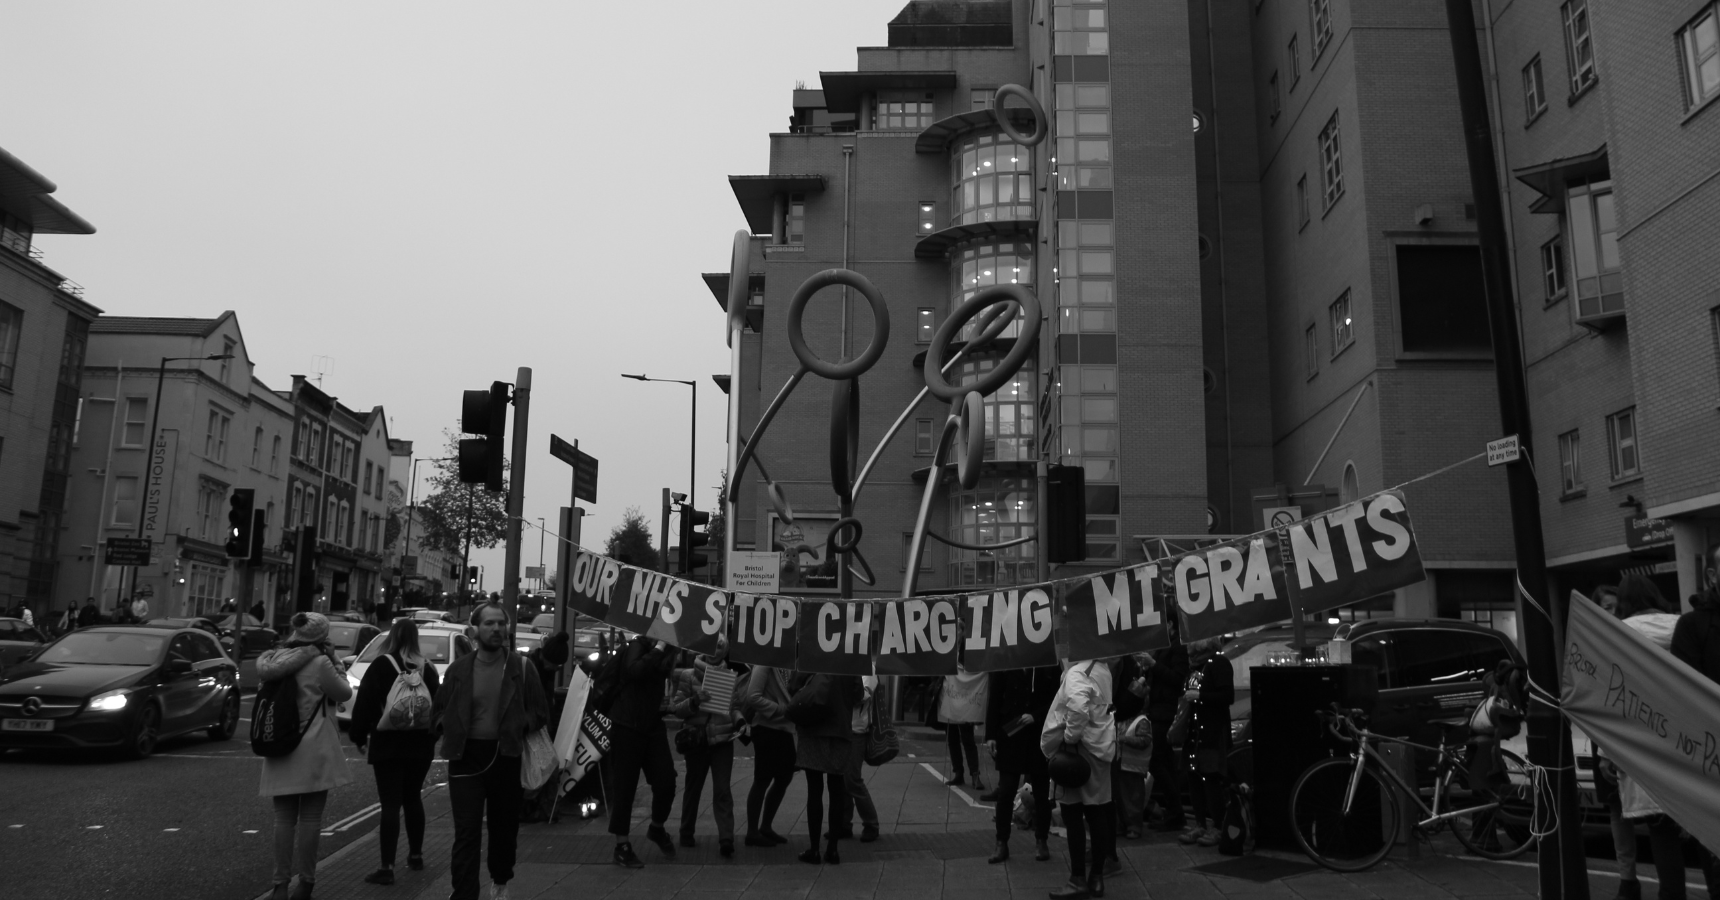 A black and white image of a street protest, with people standing around bunting hanging from a lamp post and traffic light post, that reads: "Our NHS, stop charging migrants"